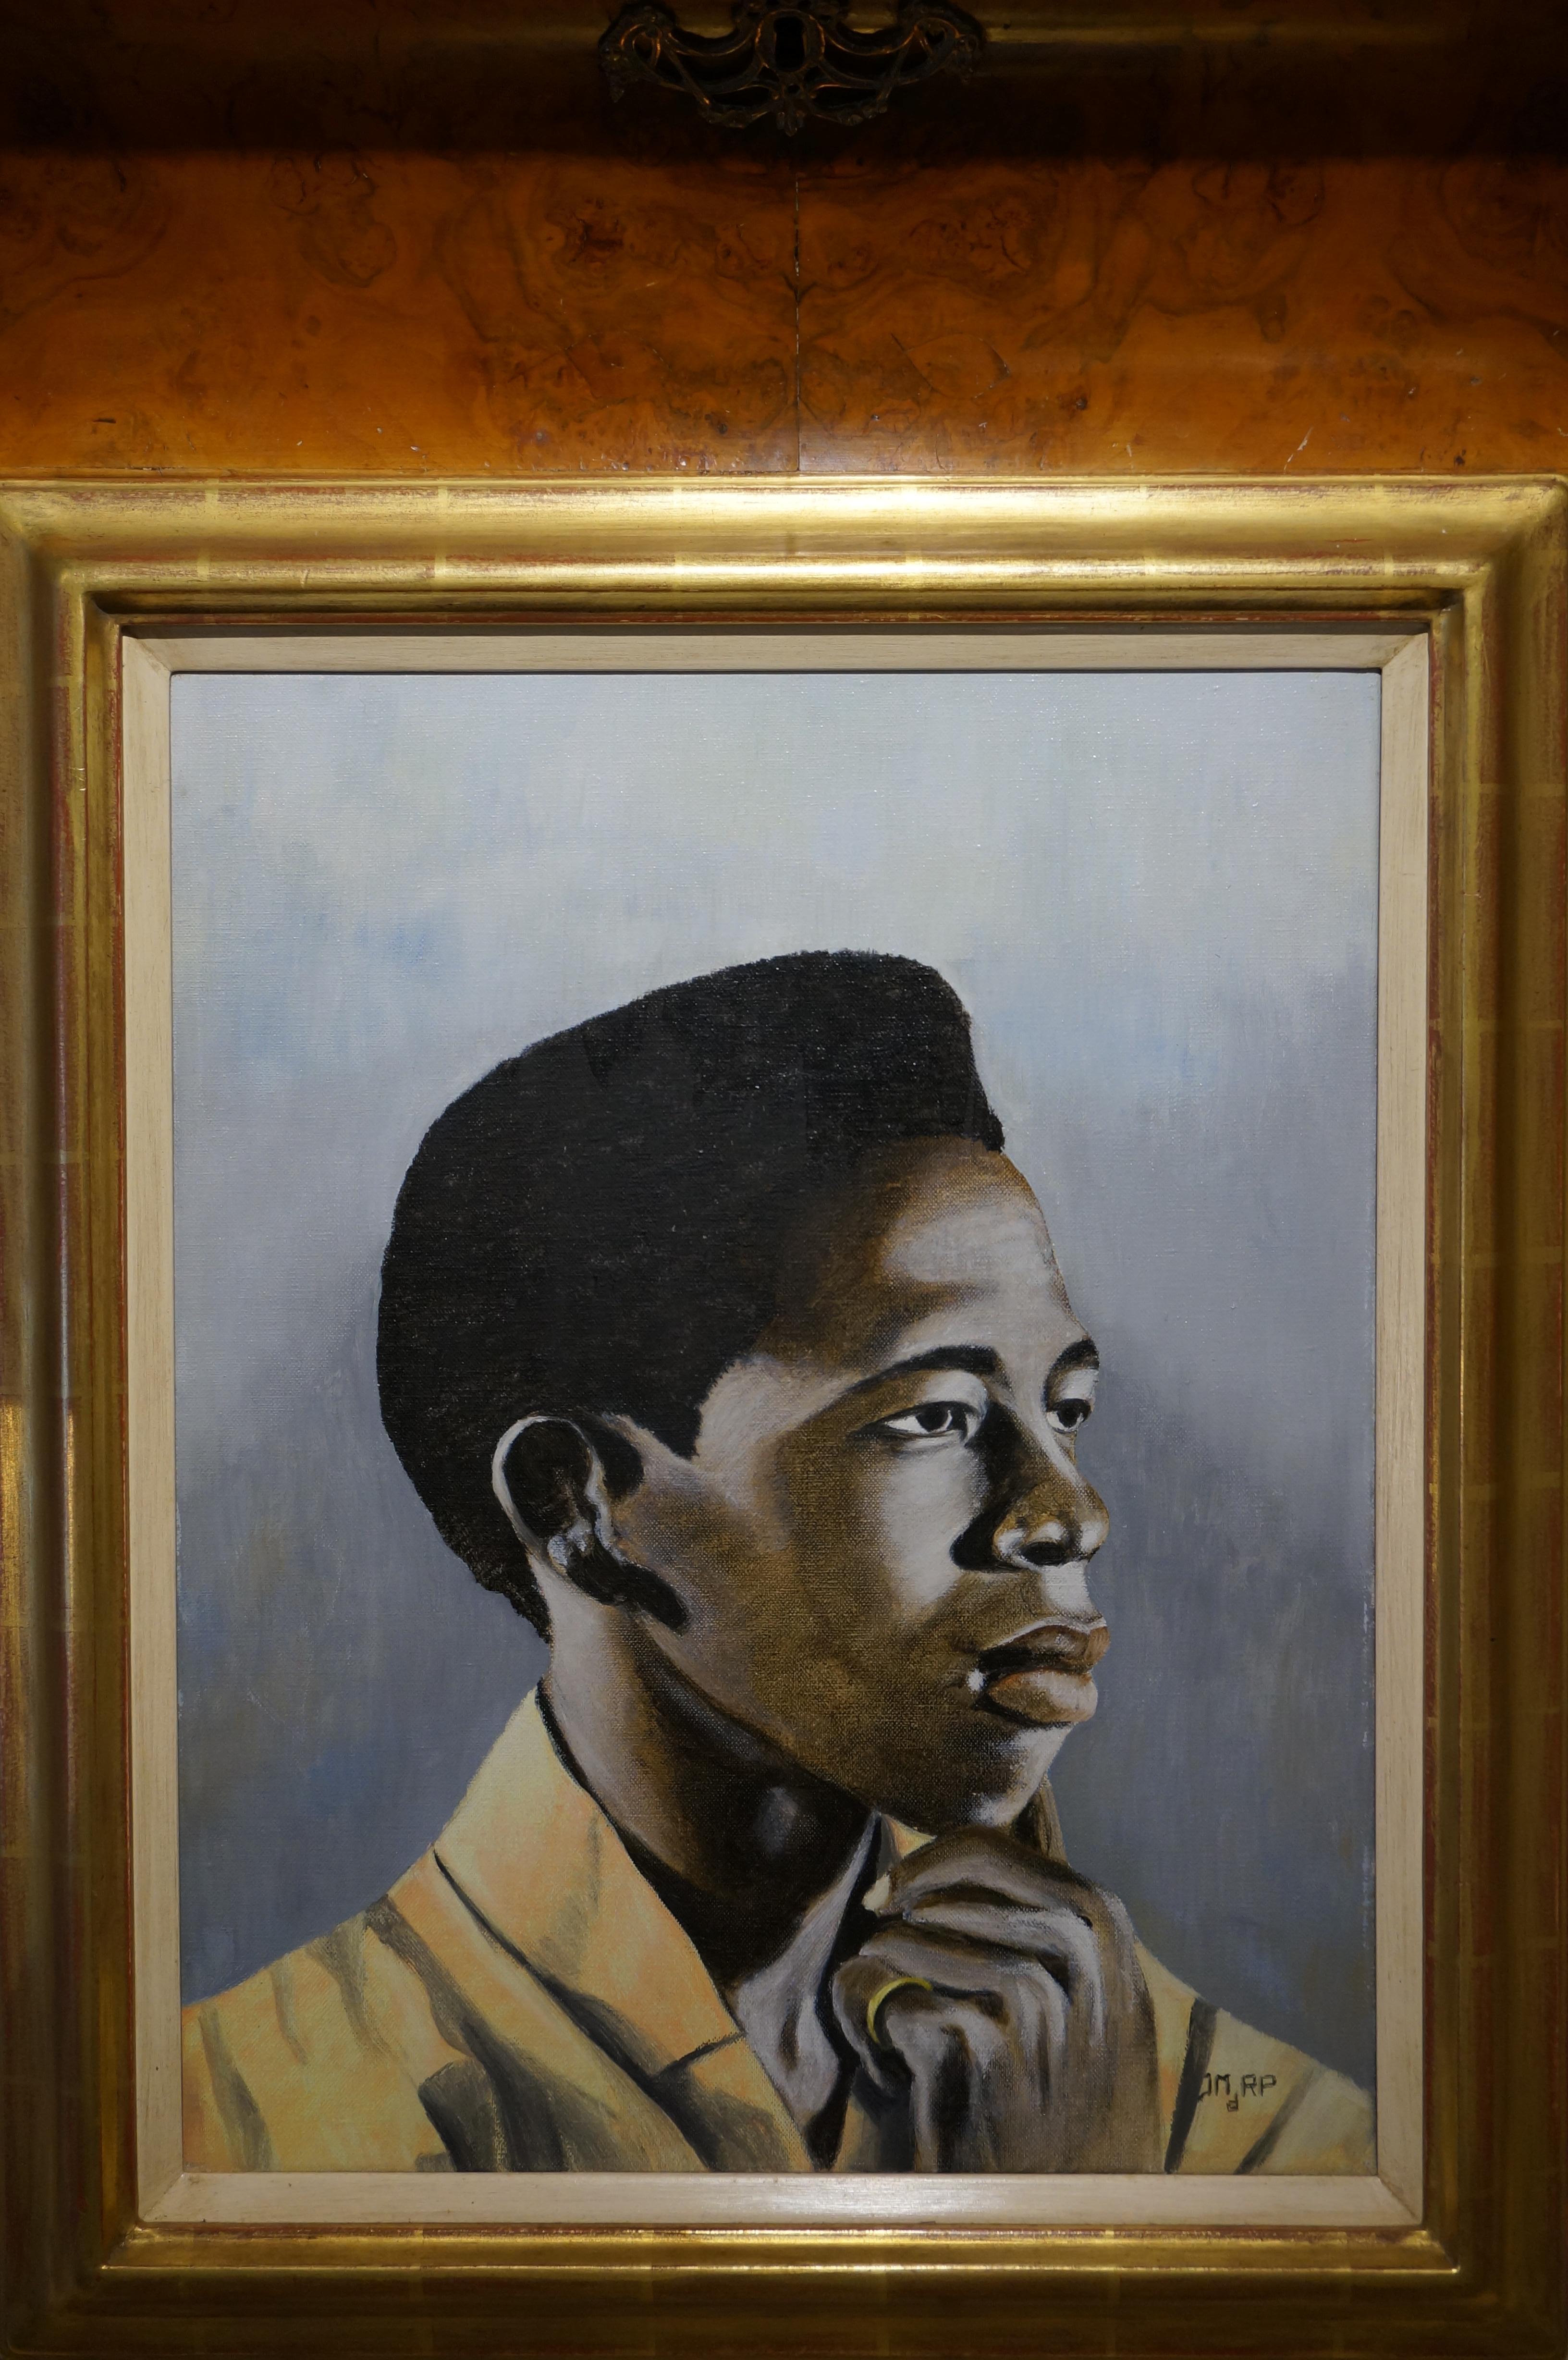 Joke de Raad - Pod
Portrait of a boy named Mano from Nickerie, Suriname
Signed lower right JM d RP
Acrylic paint on canvas
Dimensions: 50 x 39 cm

Ex-collection Gallery Lenten, The Netherlands

Gallery Lenten offered a wide range of works, among